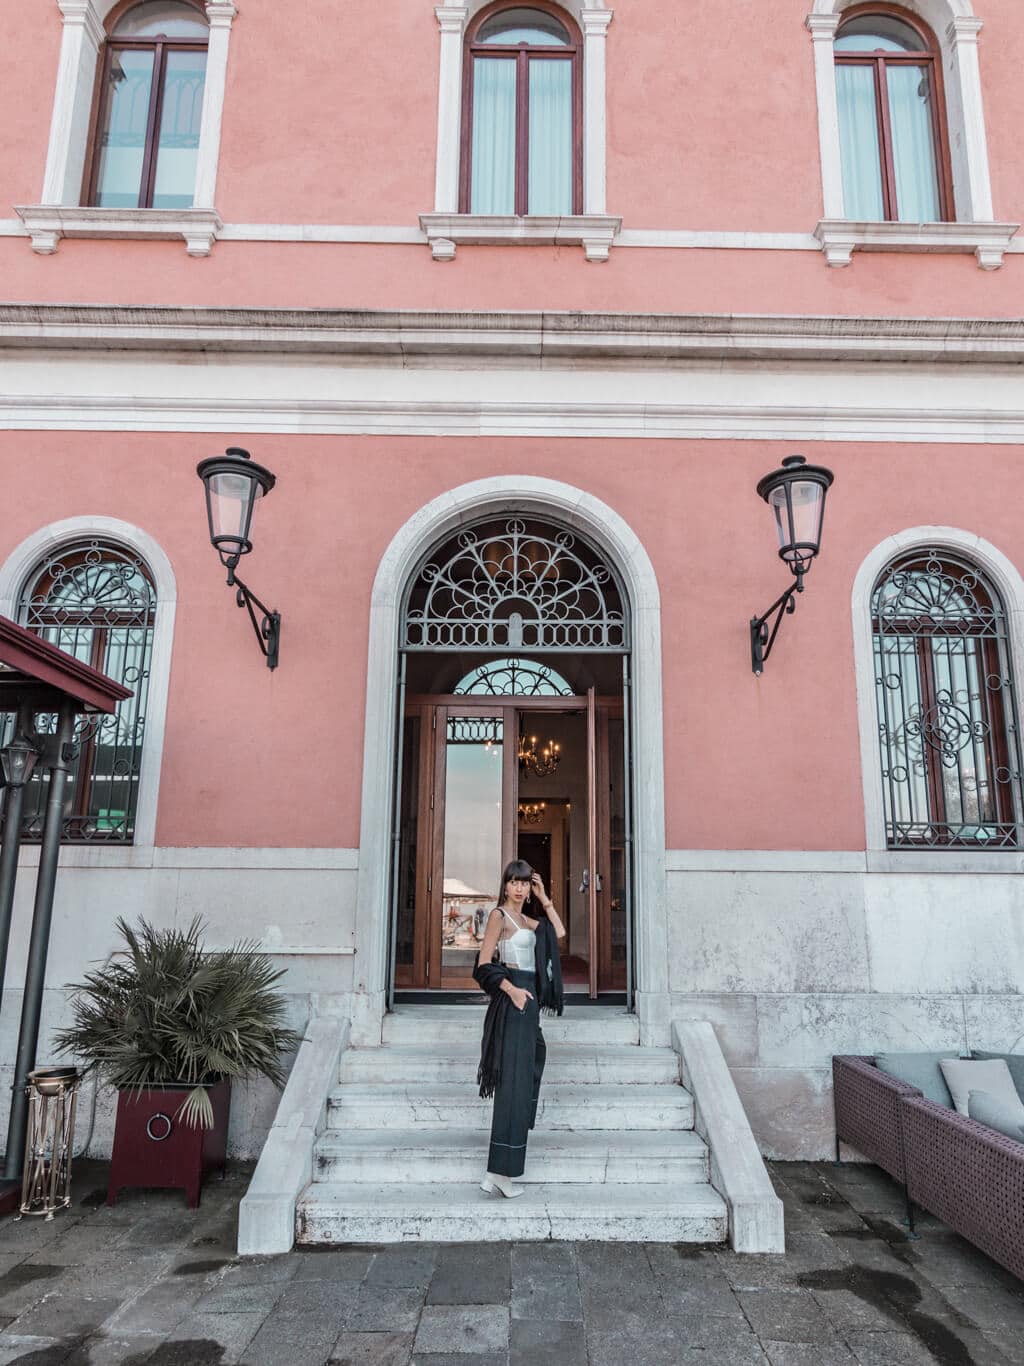 San Clemente Palace Kempinski - Hotel review in Venice